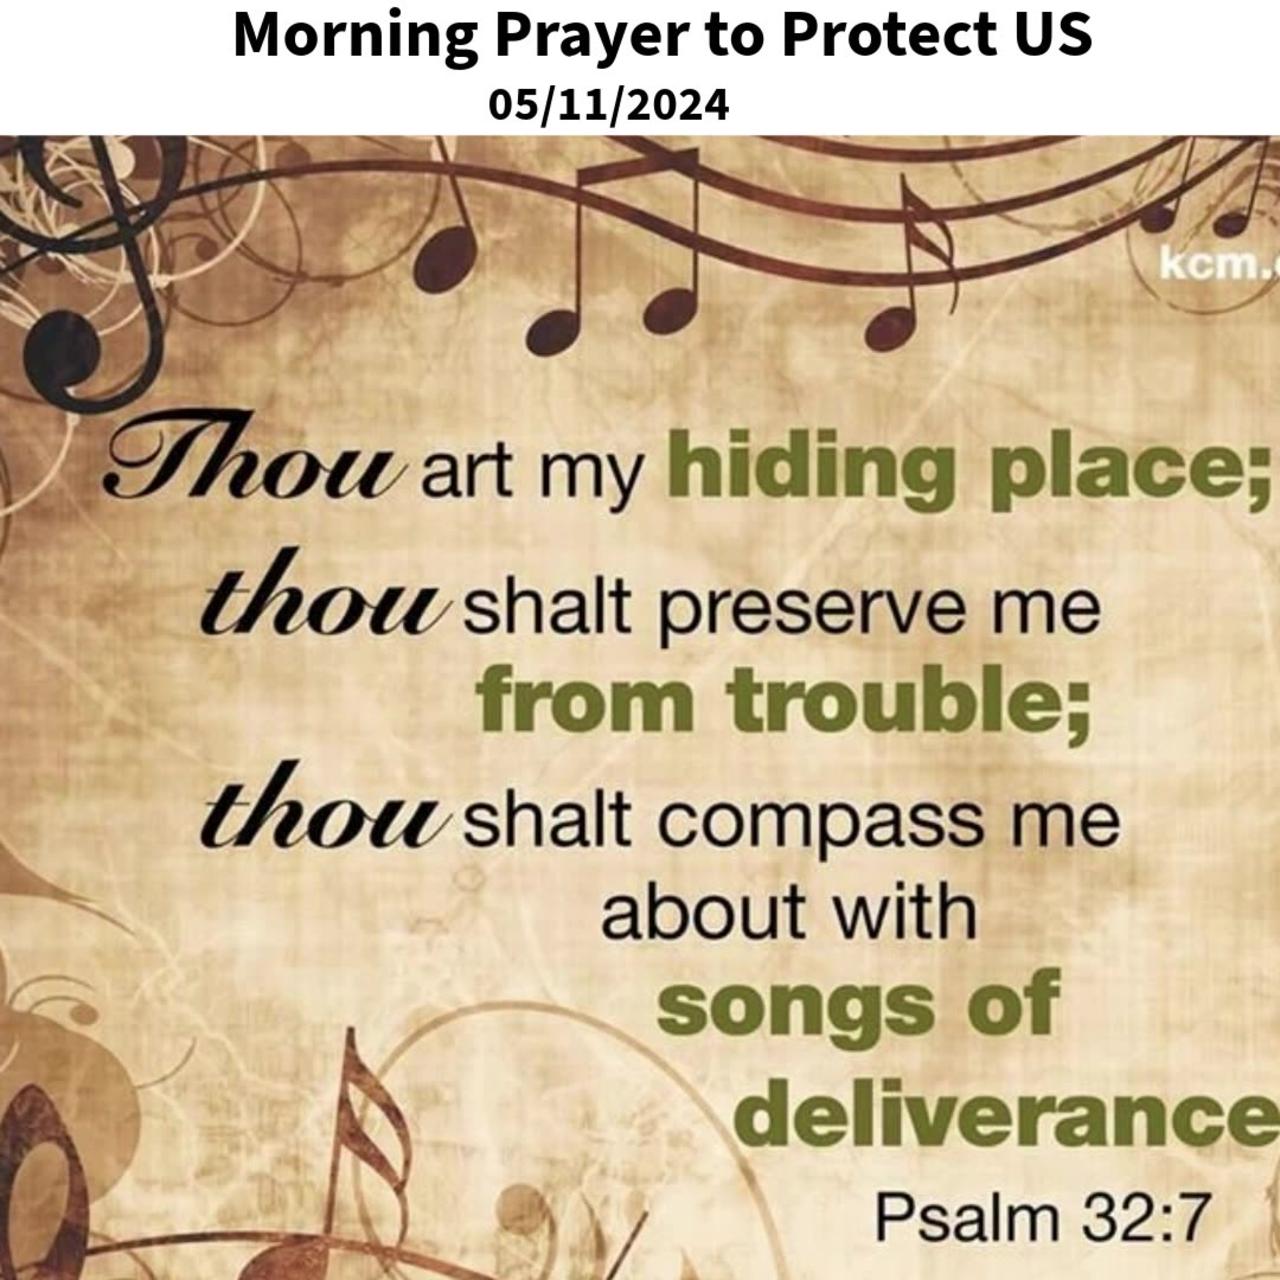 Morning Prayer to Protect US #youtubeshorts #grace #jesus #mercy #faith #fyp #blessed #trust #love